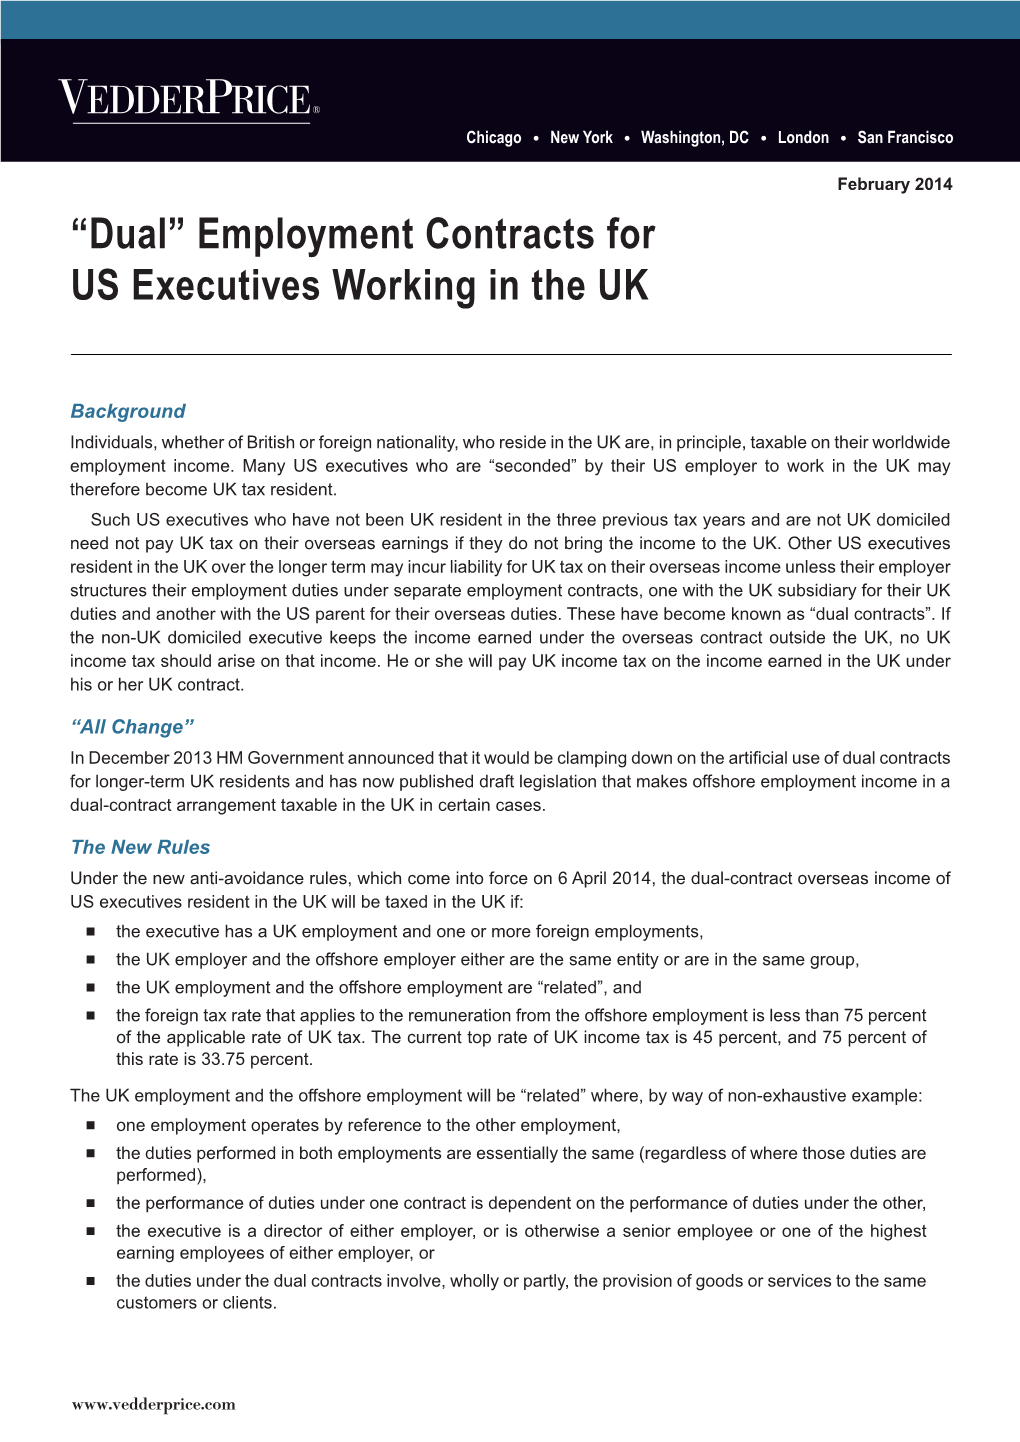 “Dual” Employment Contracts for US Executives Working in the UK